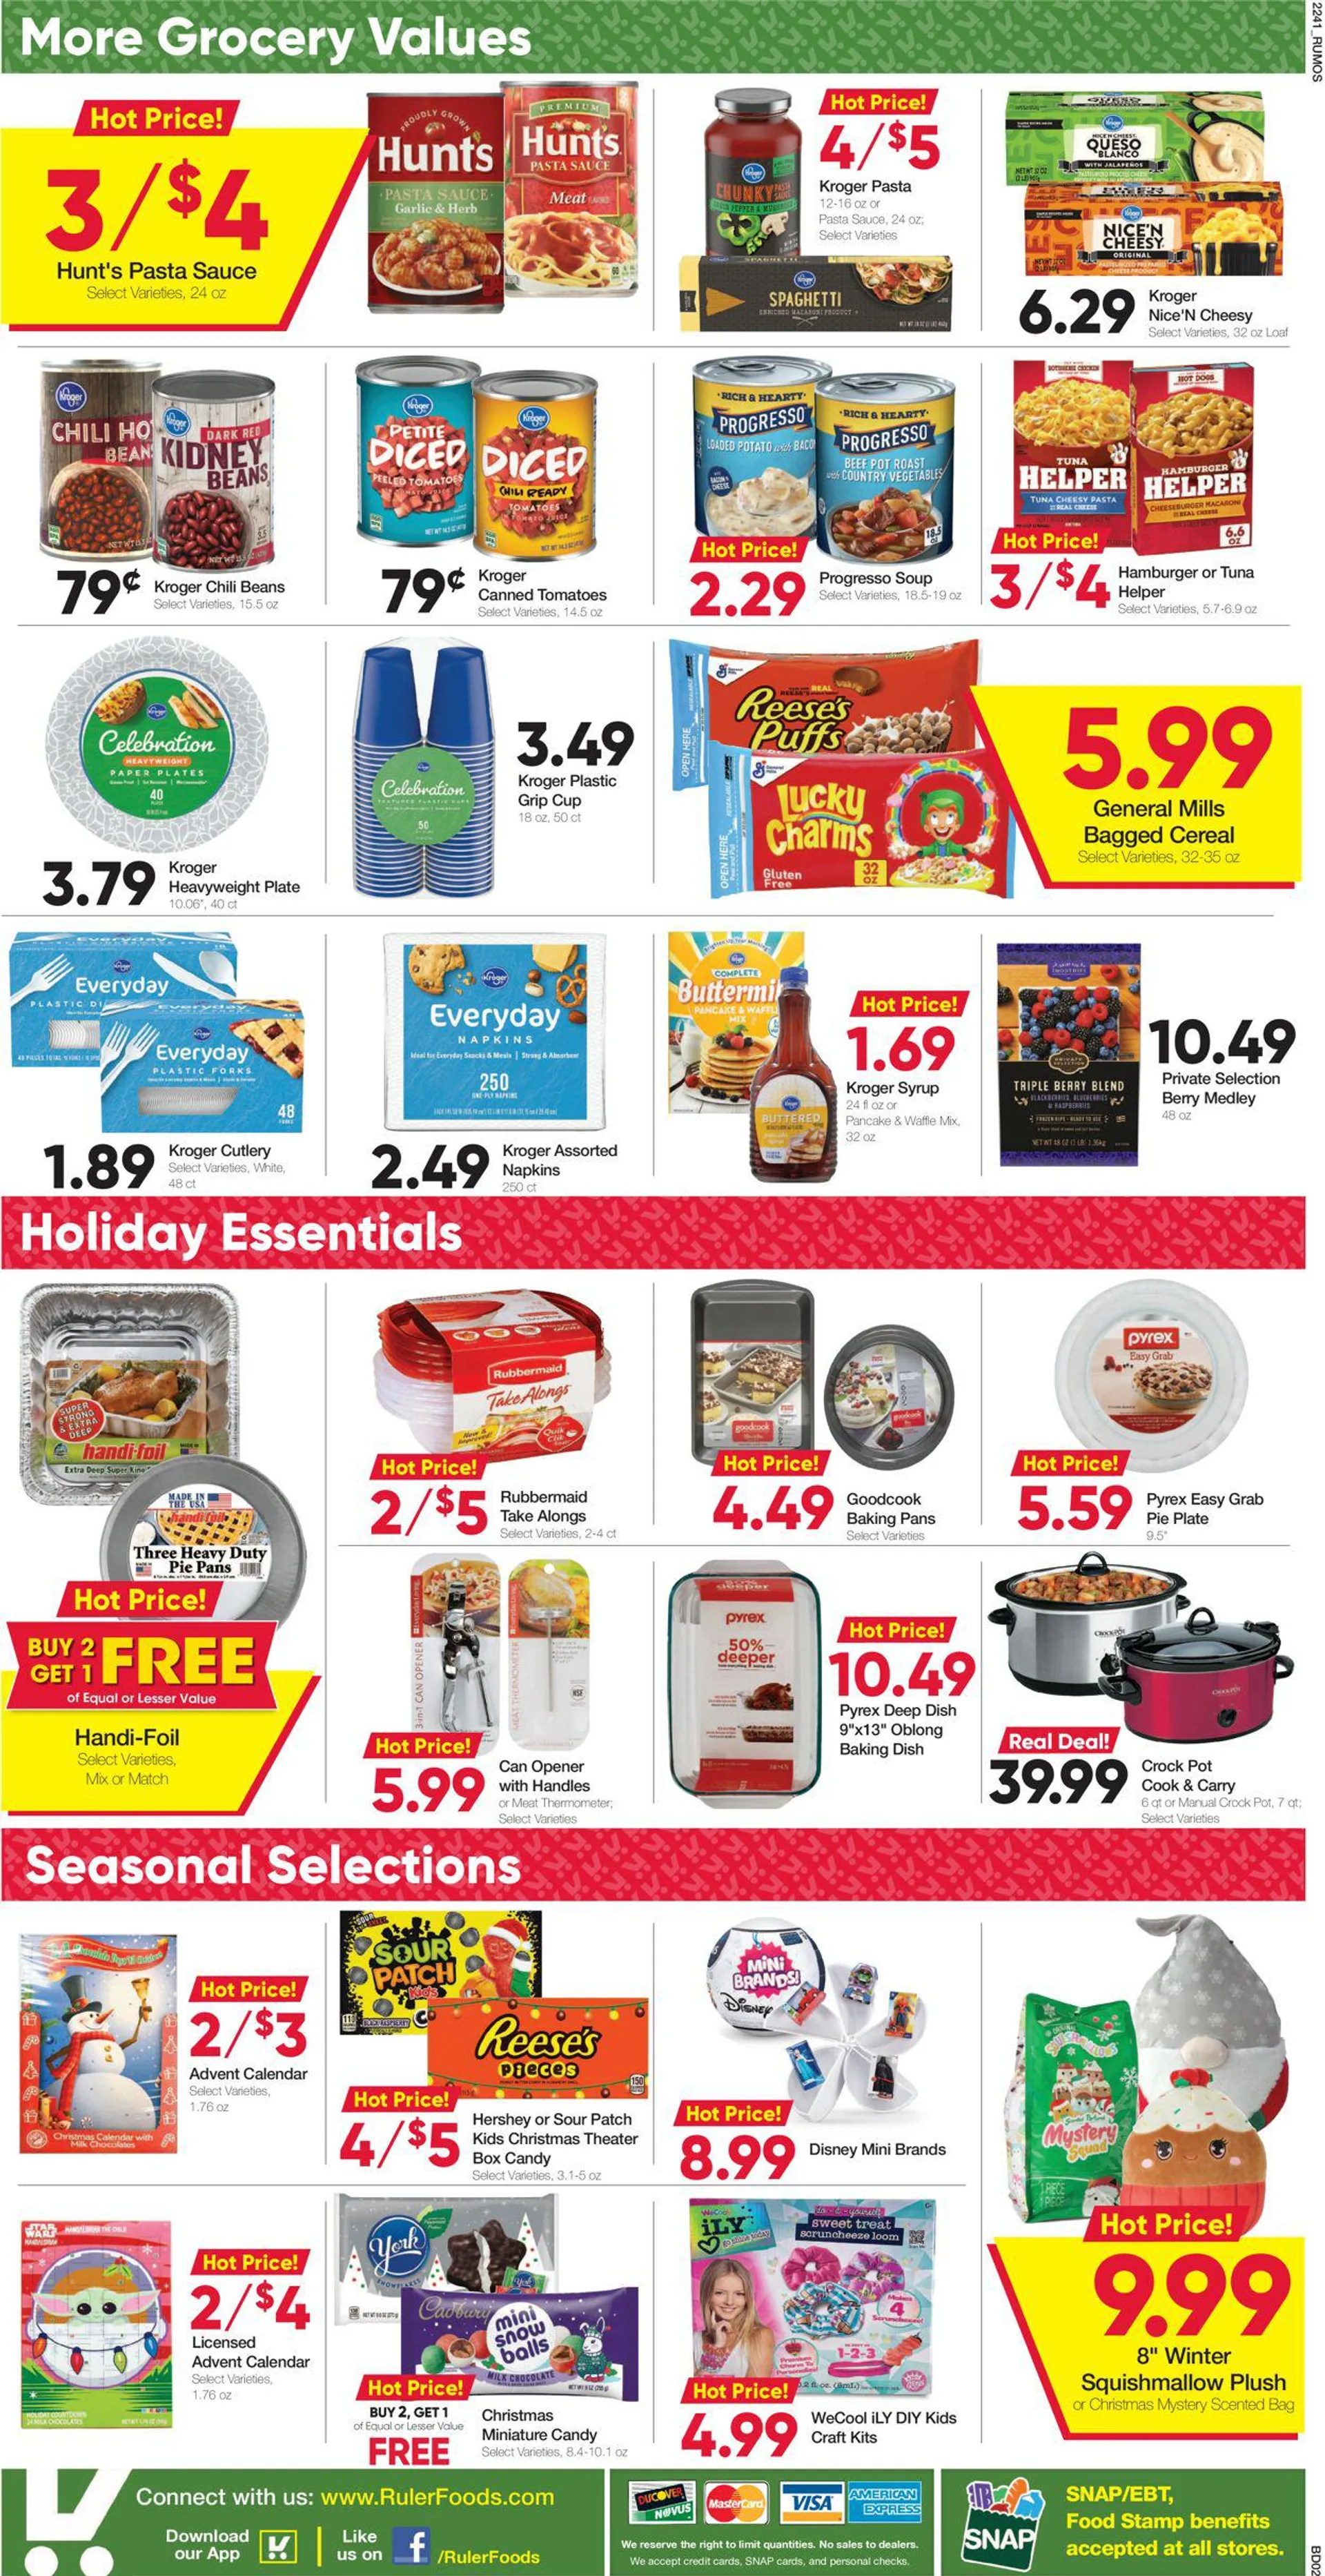 Ruler Foods Current weekly ad - 2